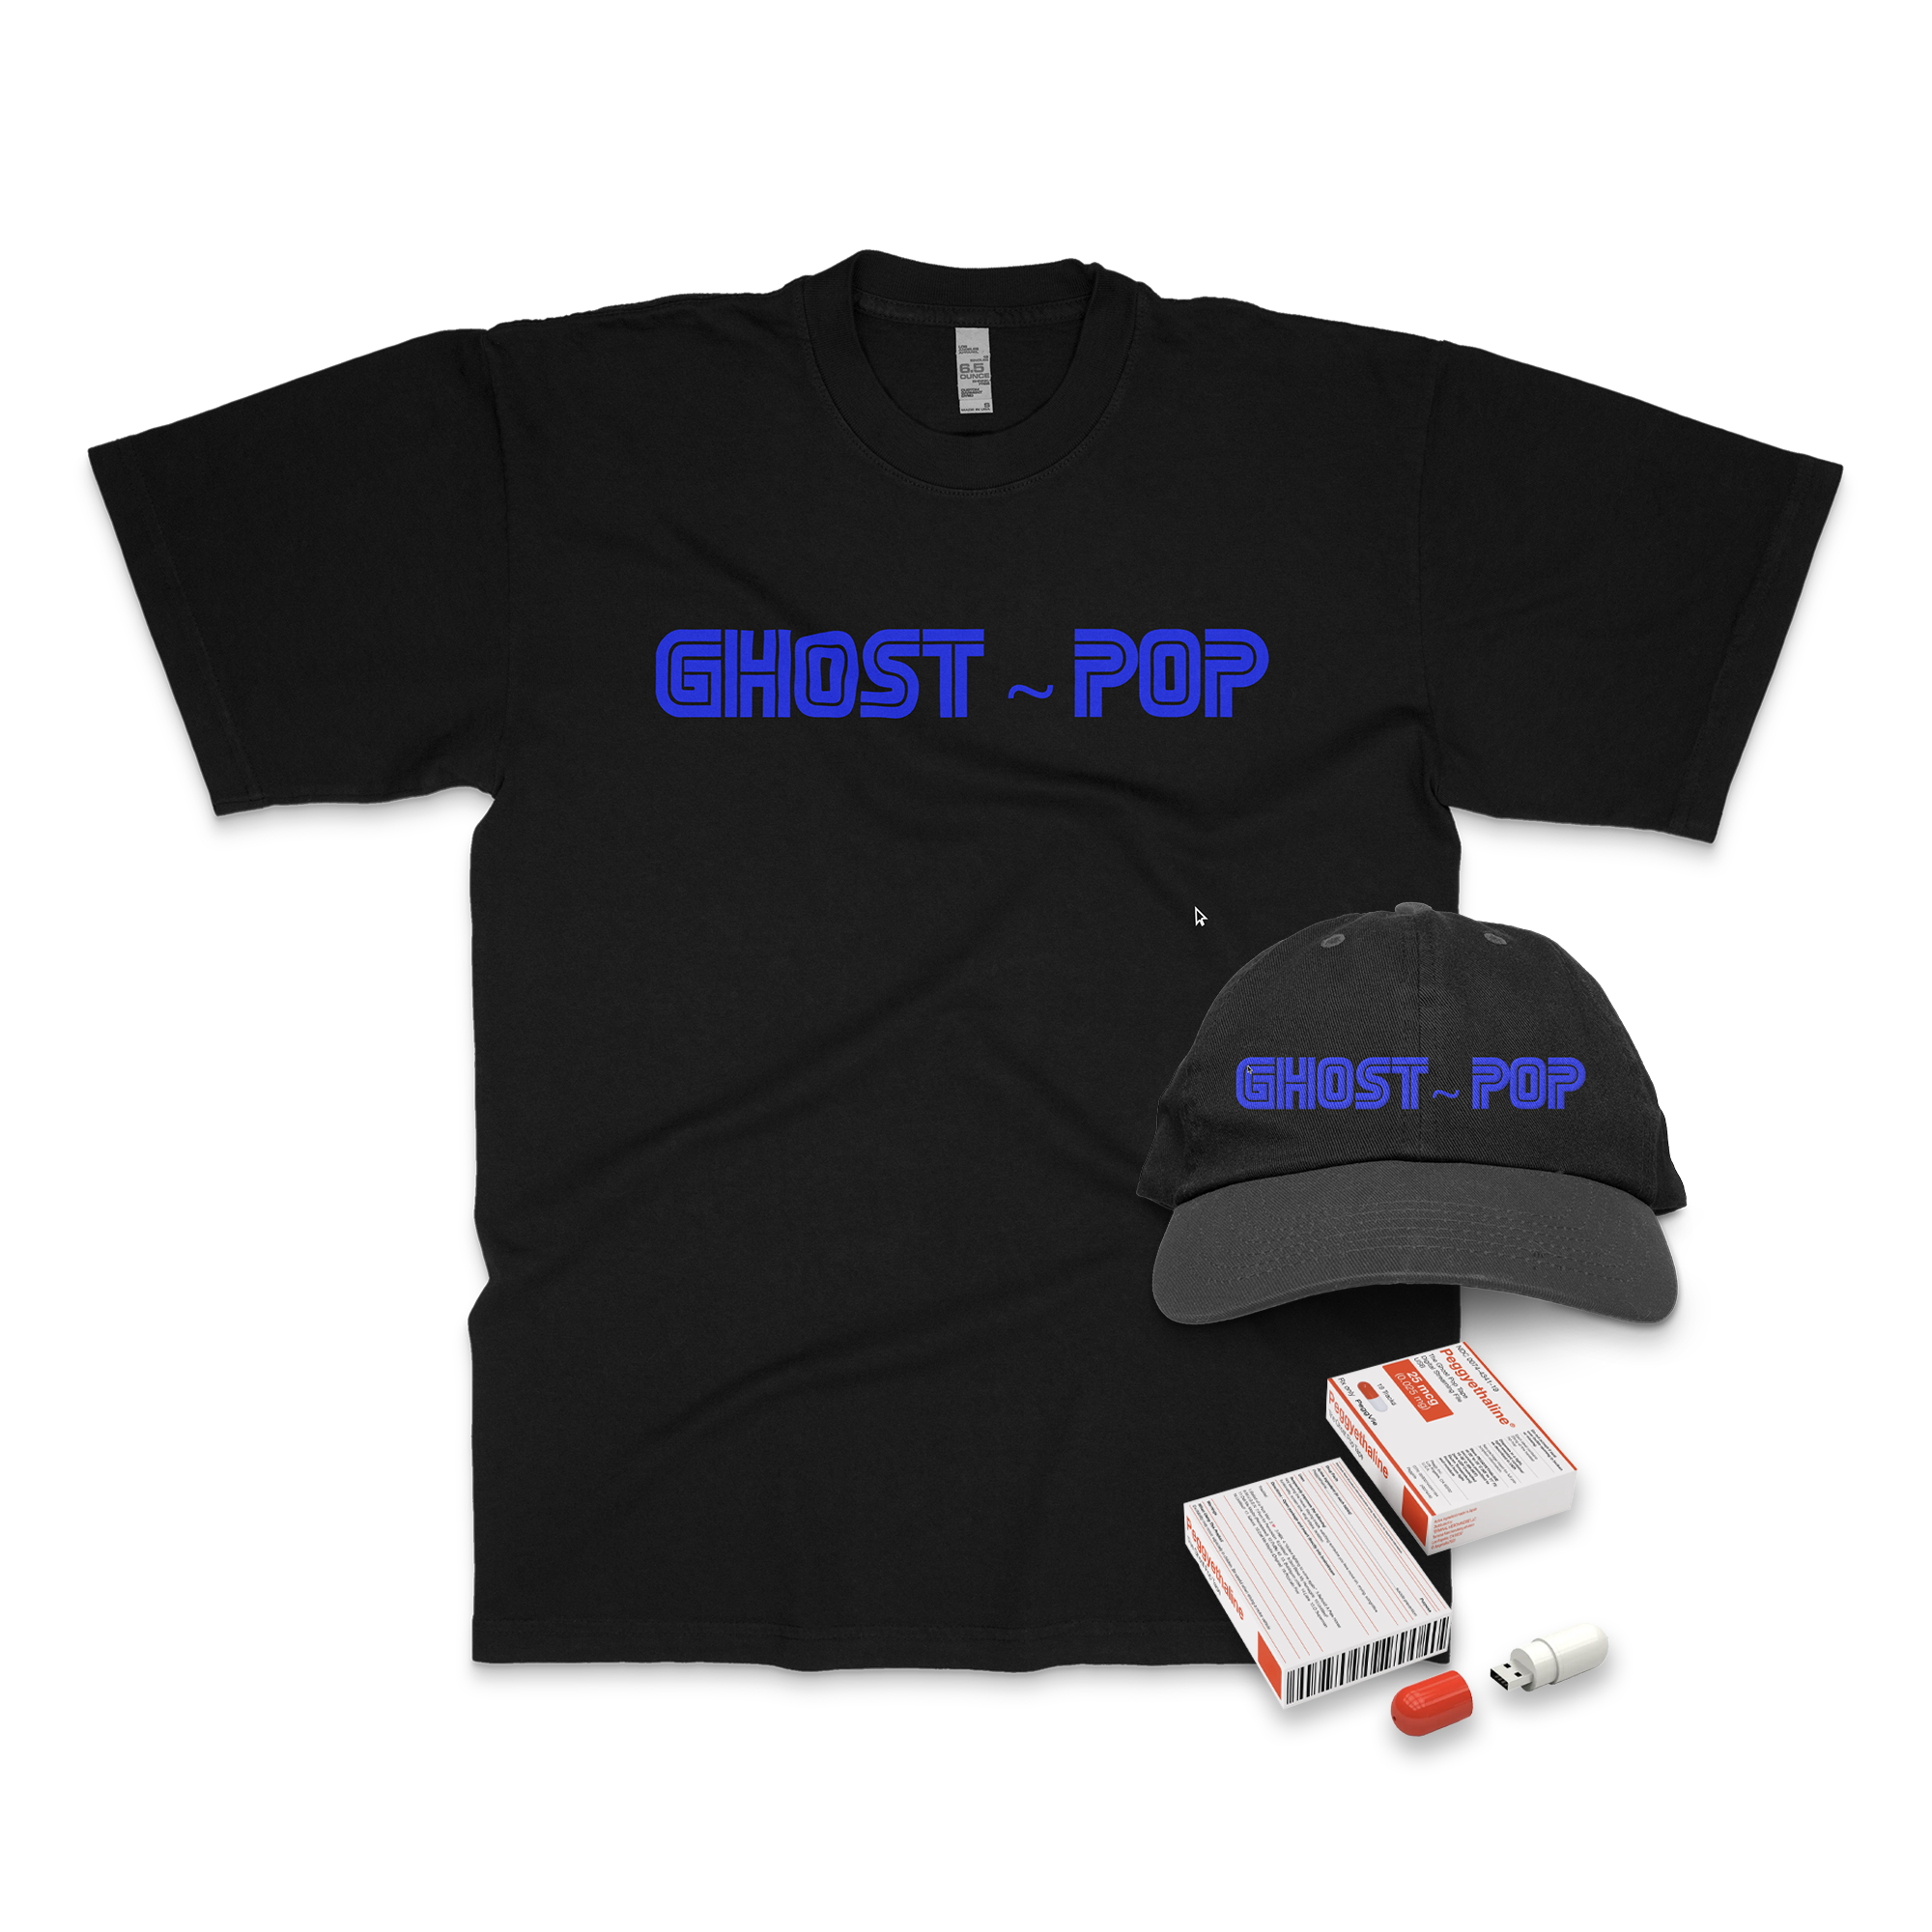 Record Store Day - Ghost Pop Tape Bundle